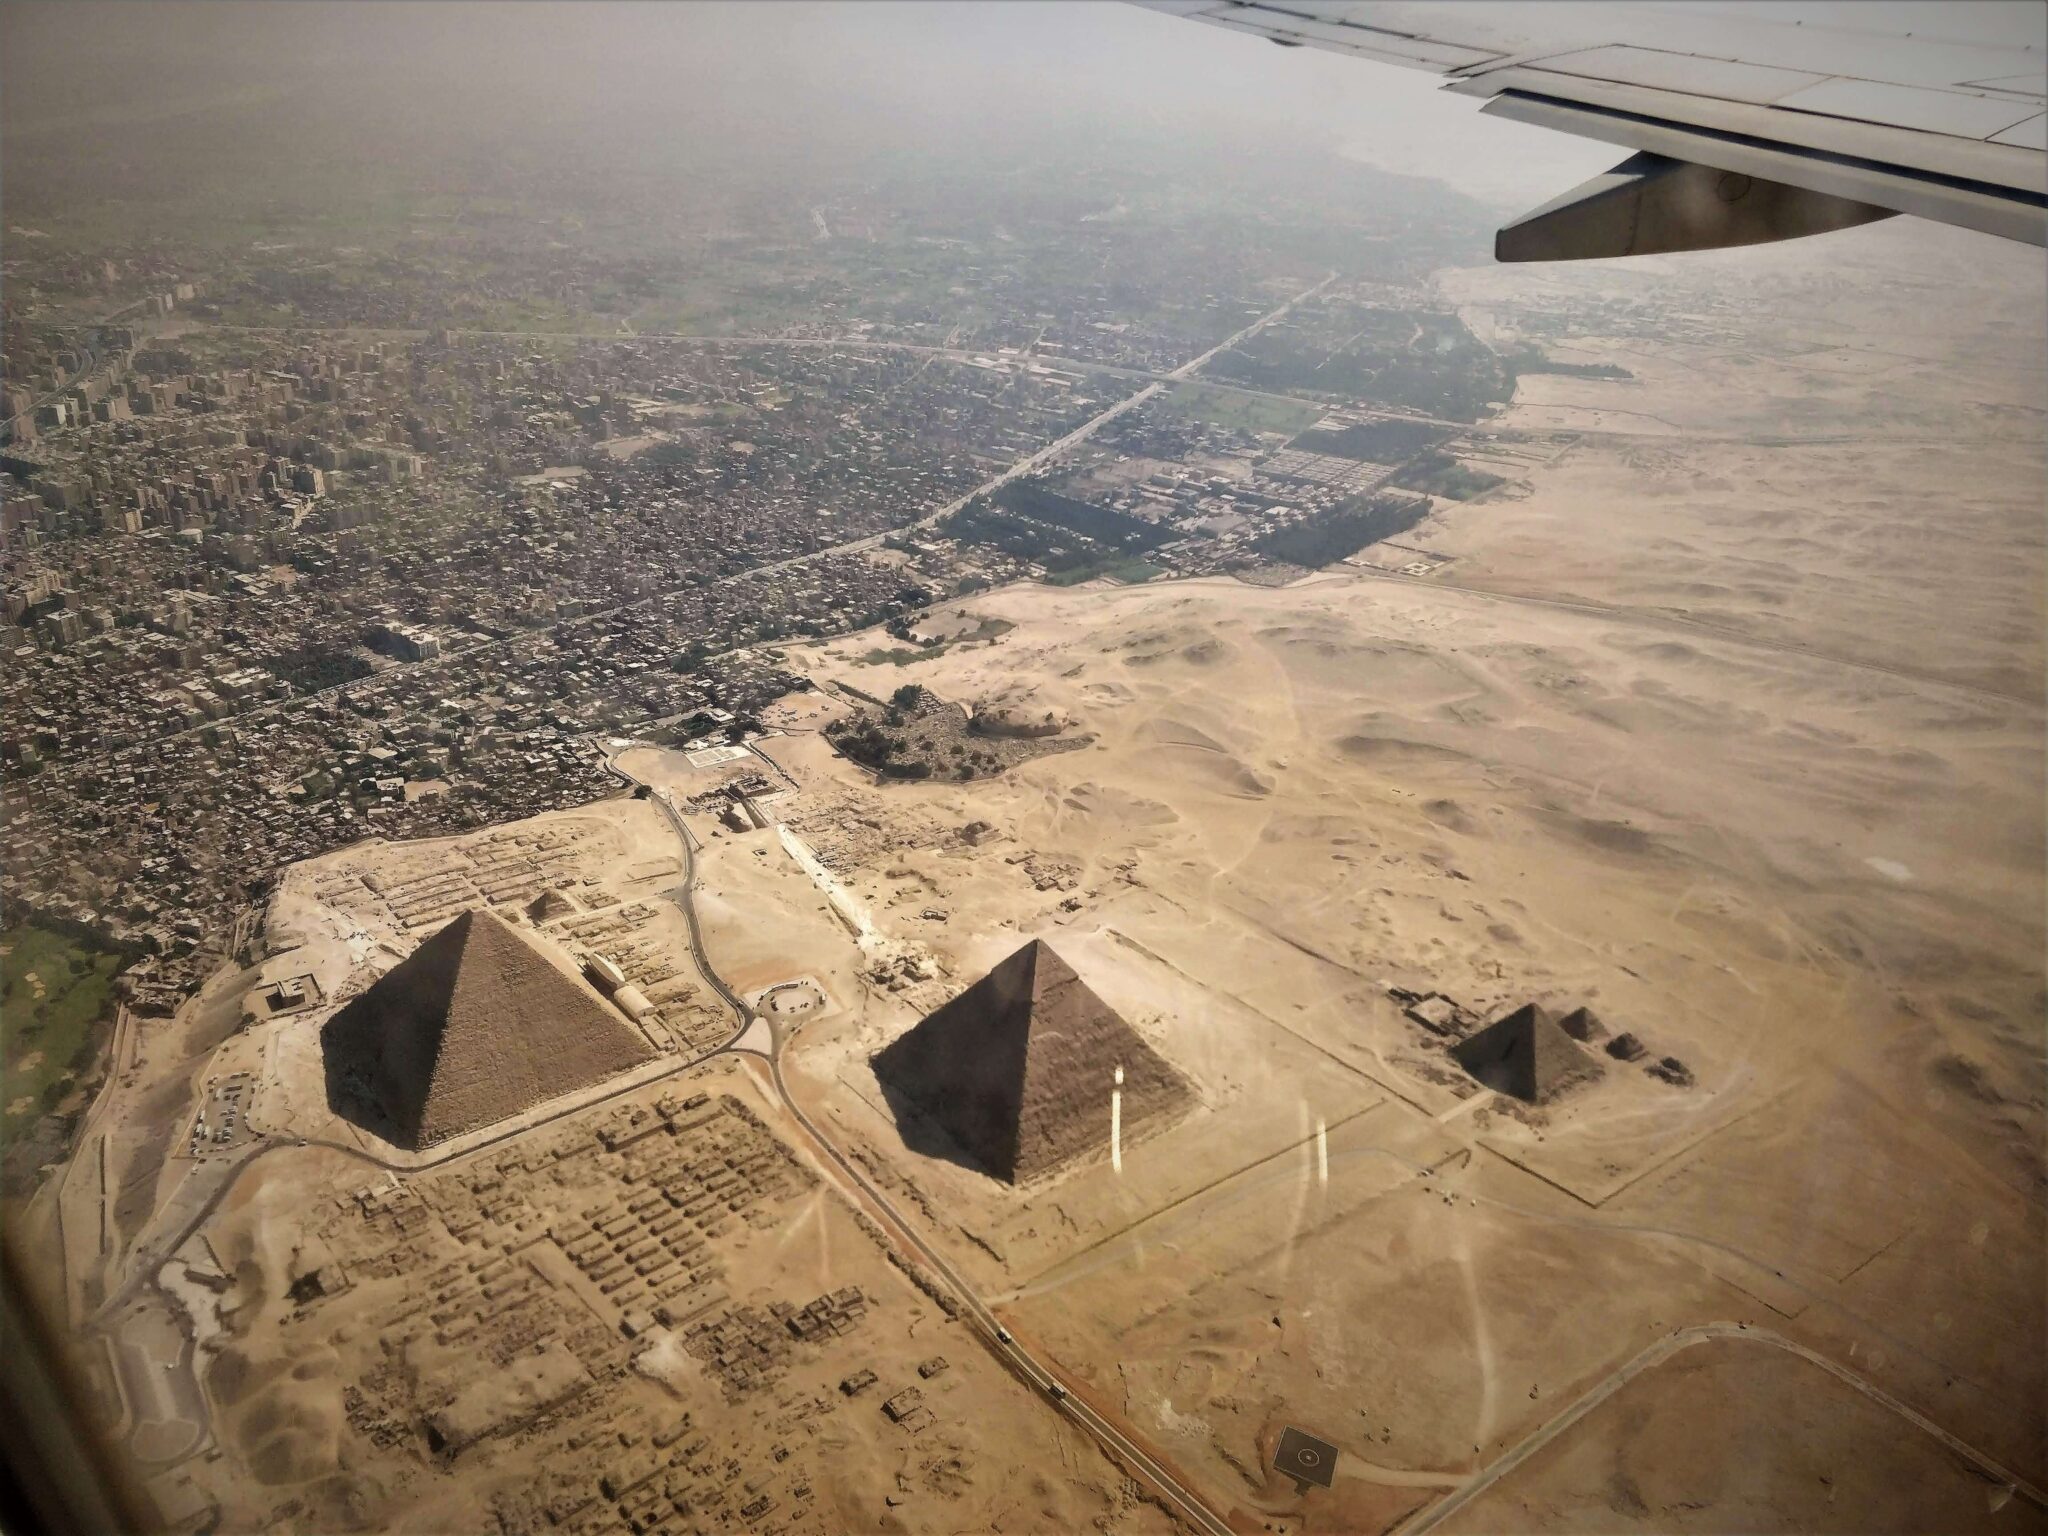 Cairo Egypt from an Airplane